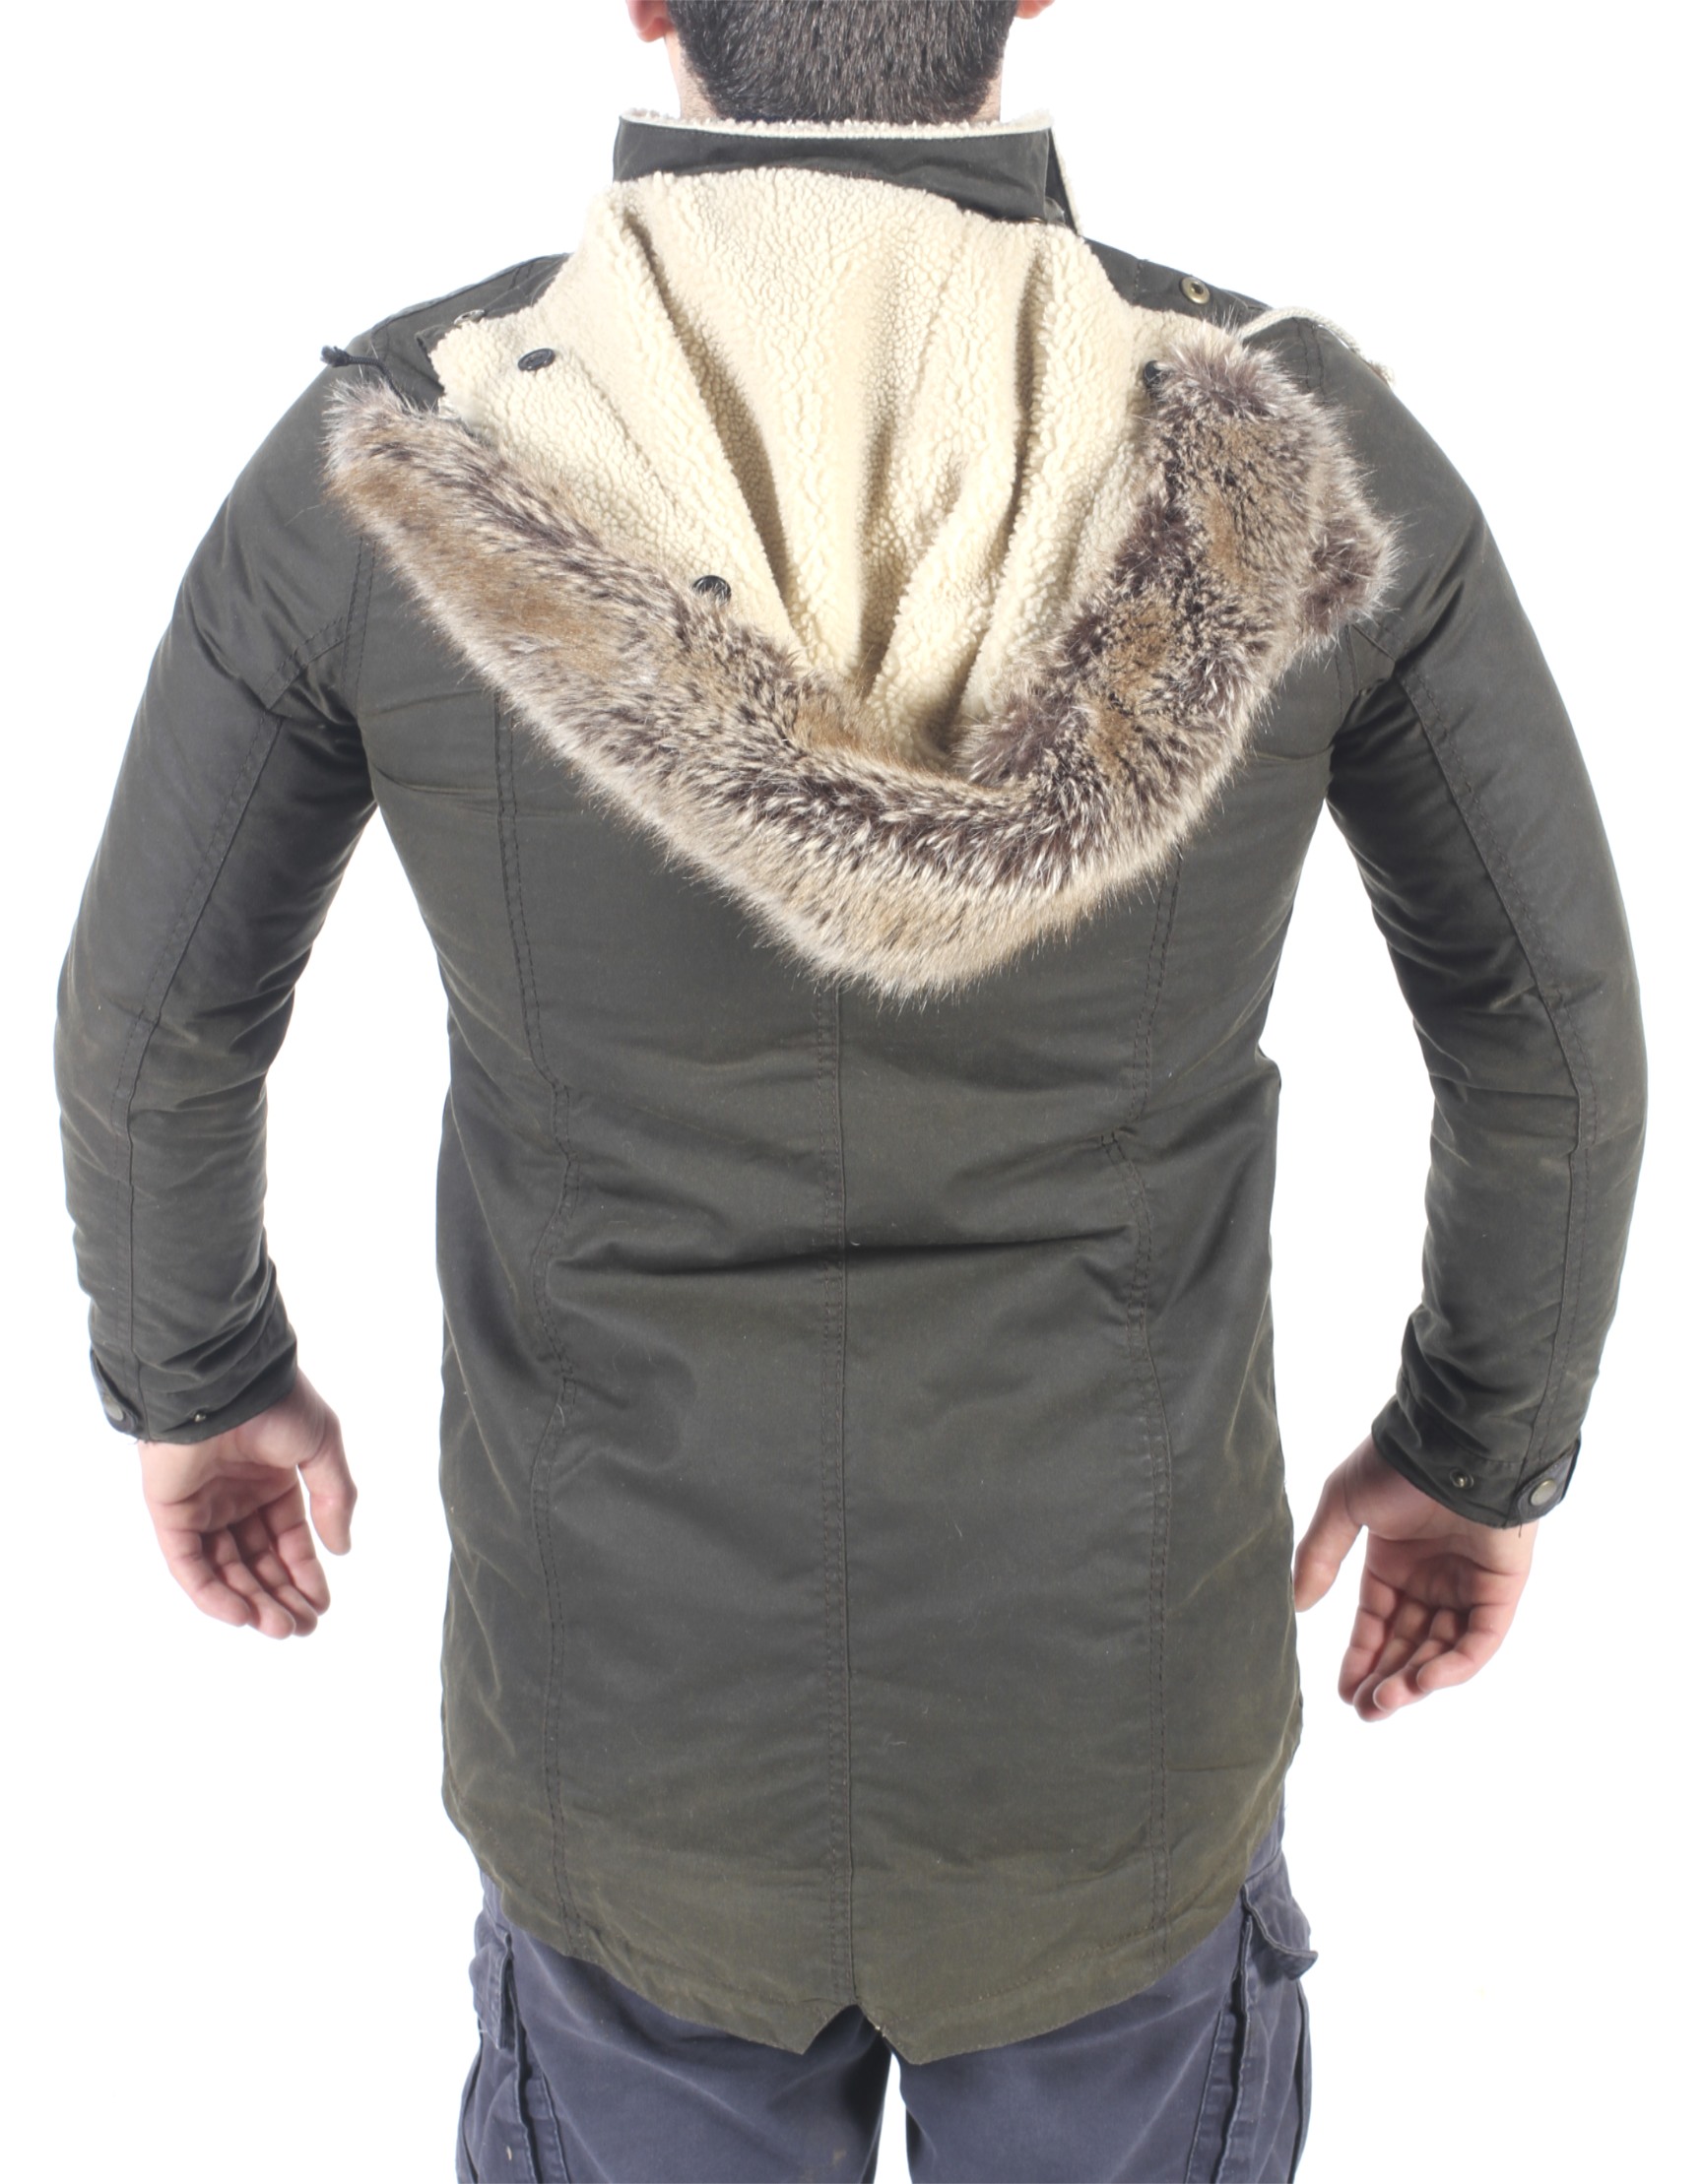 A Barbour ladies wax jacket. With white fleece lining and a hood, size 10. - Image 2 of 3